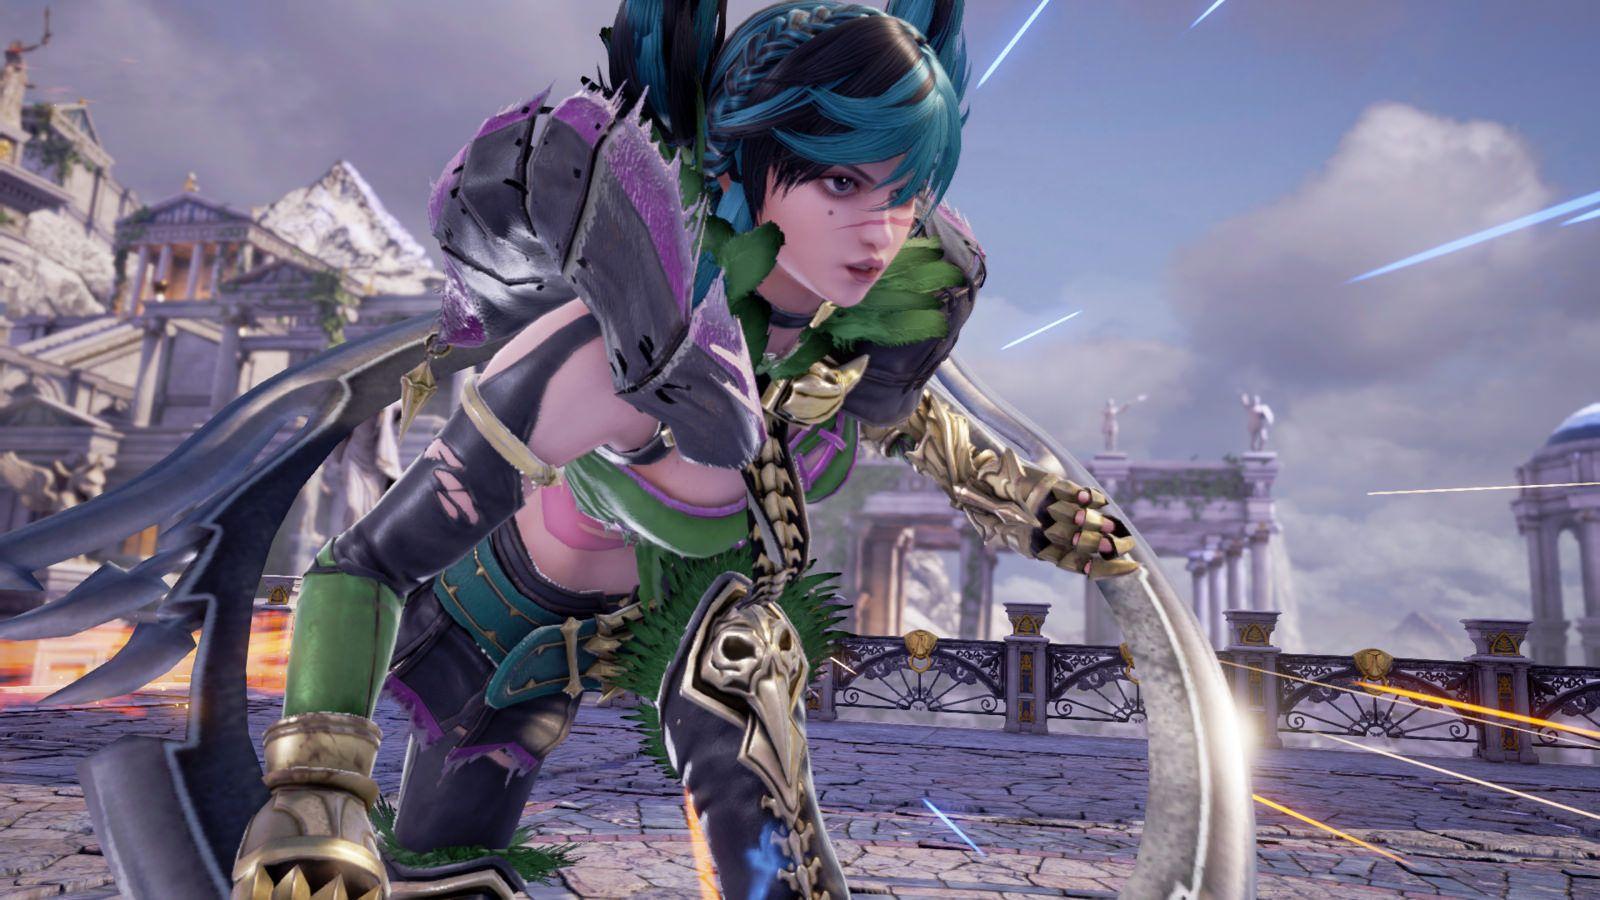 Tira Returns to the Stage of History in SoulCalibur VI